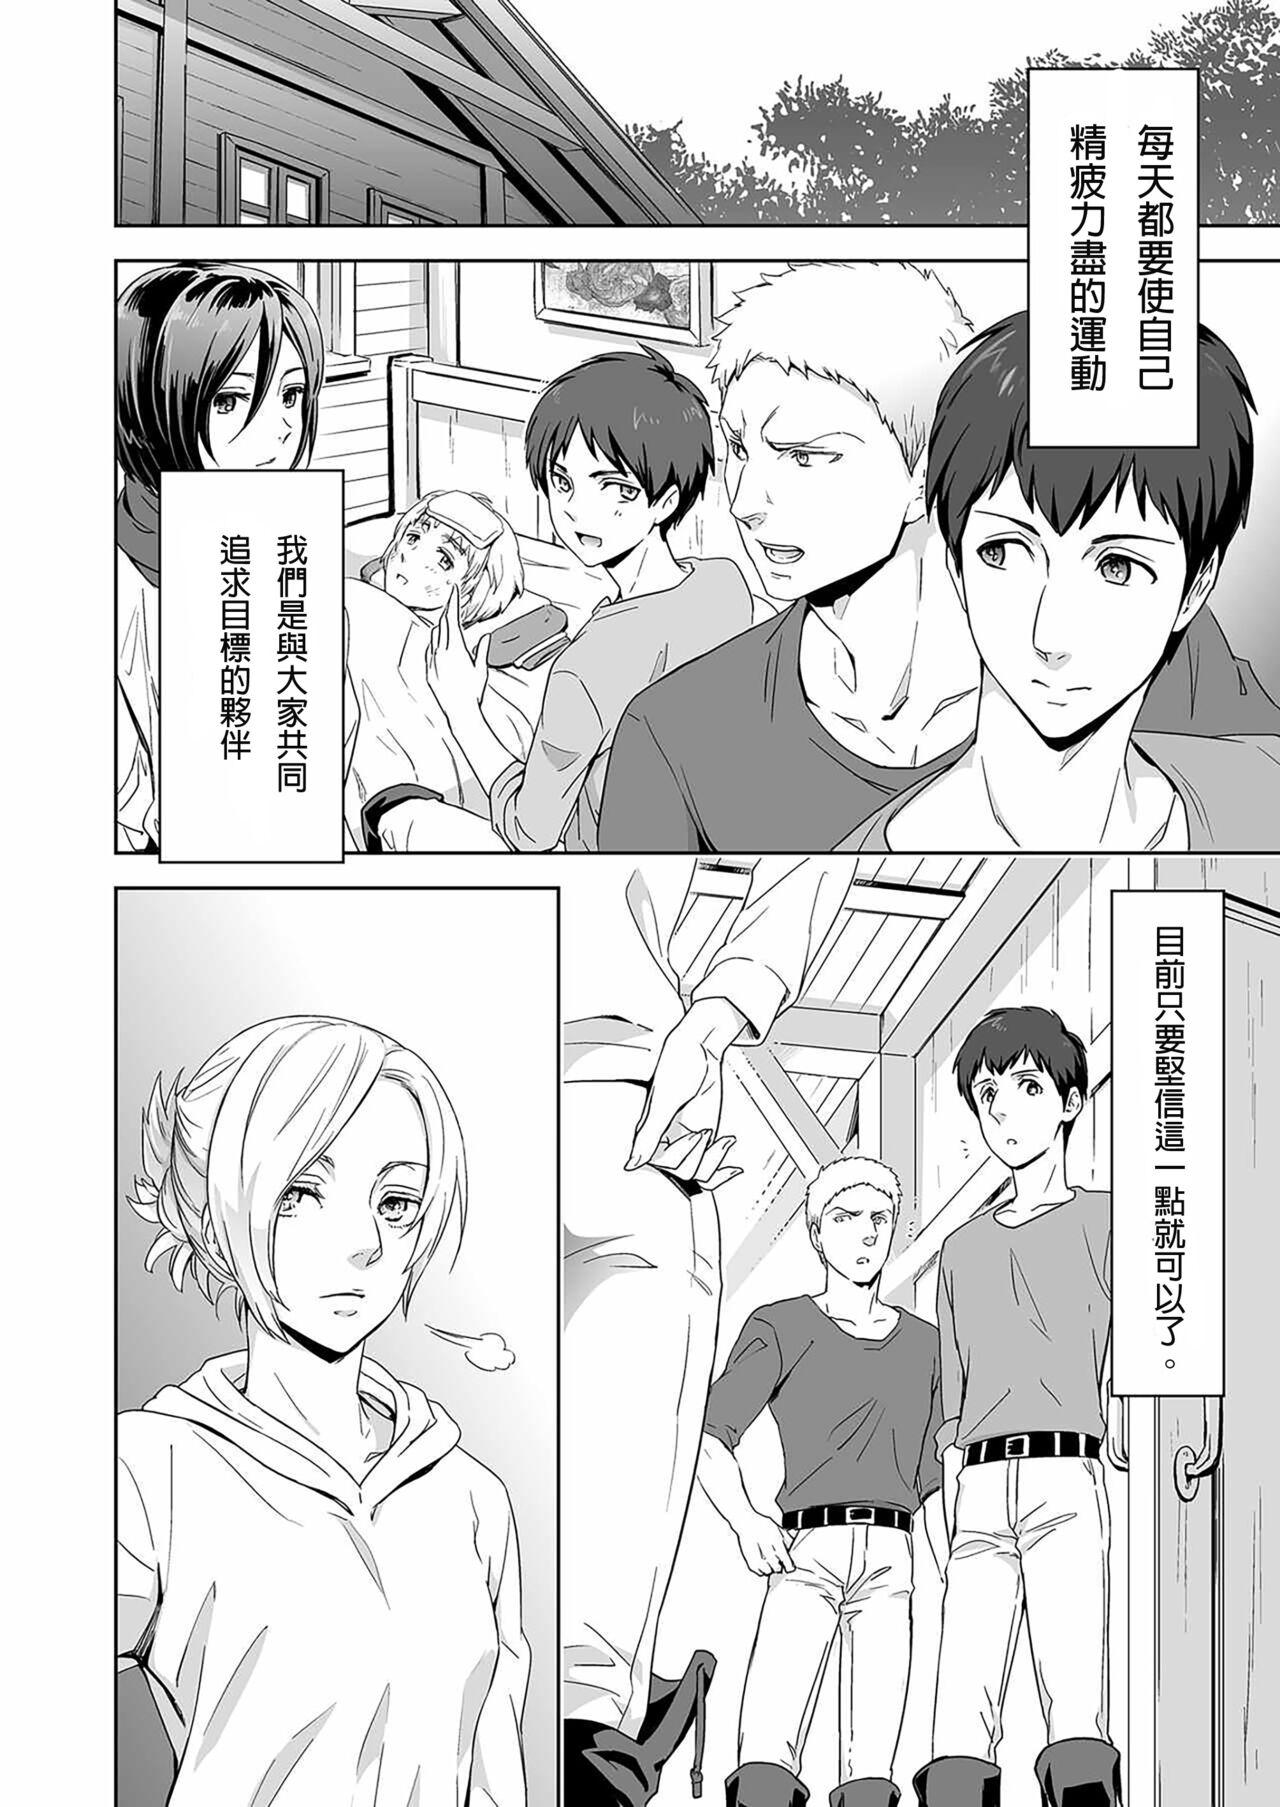 Fucking Pussy Reiner Braun x Bertolt Hoover   are the ma ssa cre - Shingeki no kyojin | attack on titan Family Taboo - Page 11